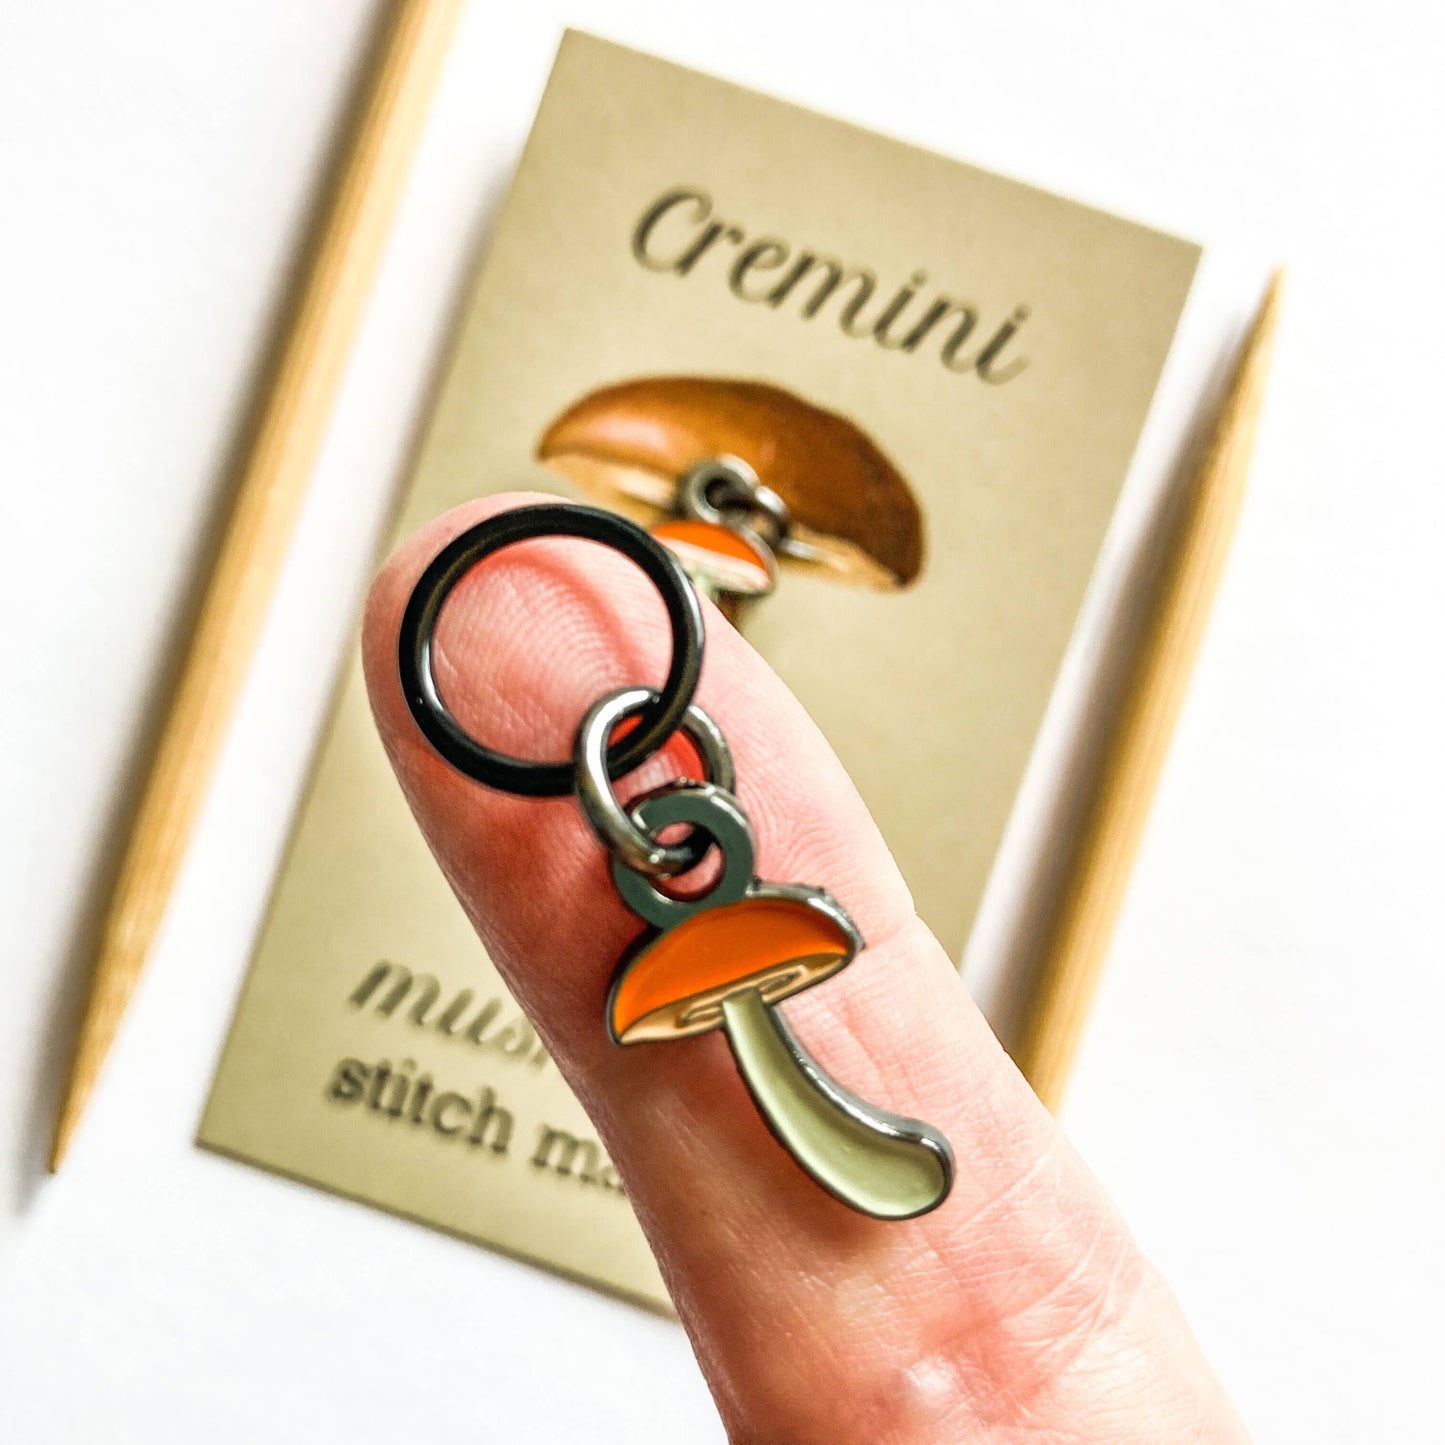 Makers mushrooms Cremini Single Stitch Marker from Firefly Notes